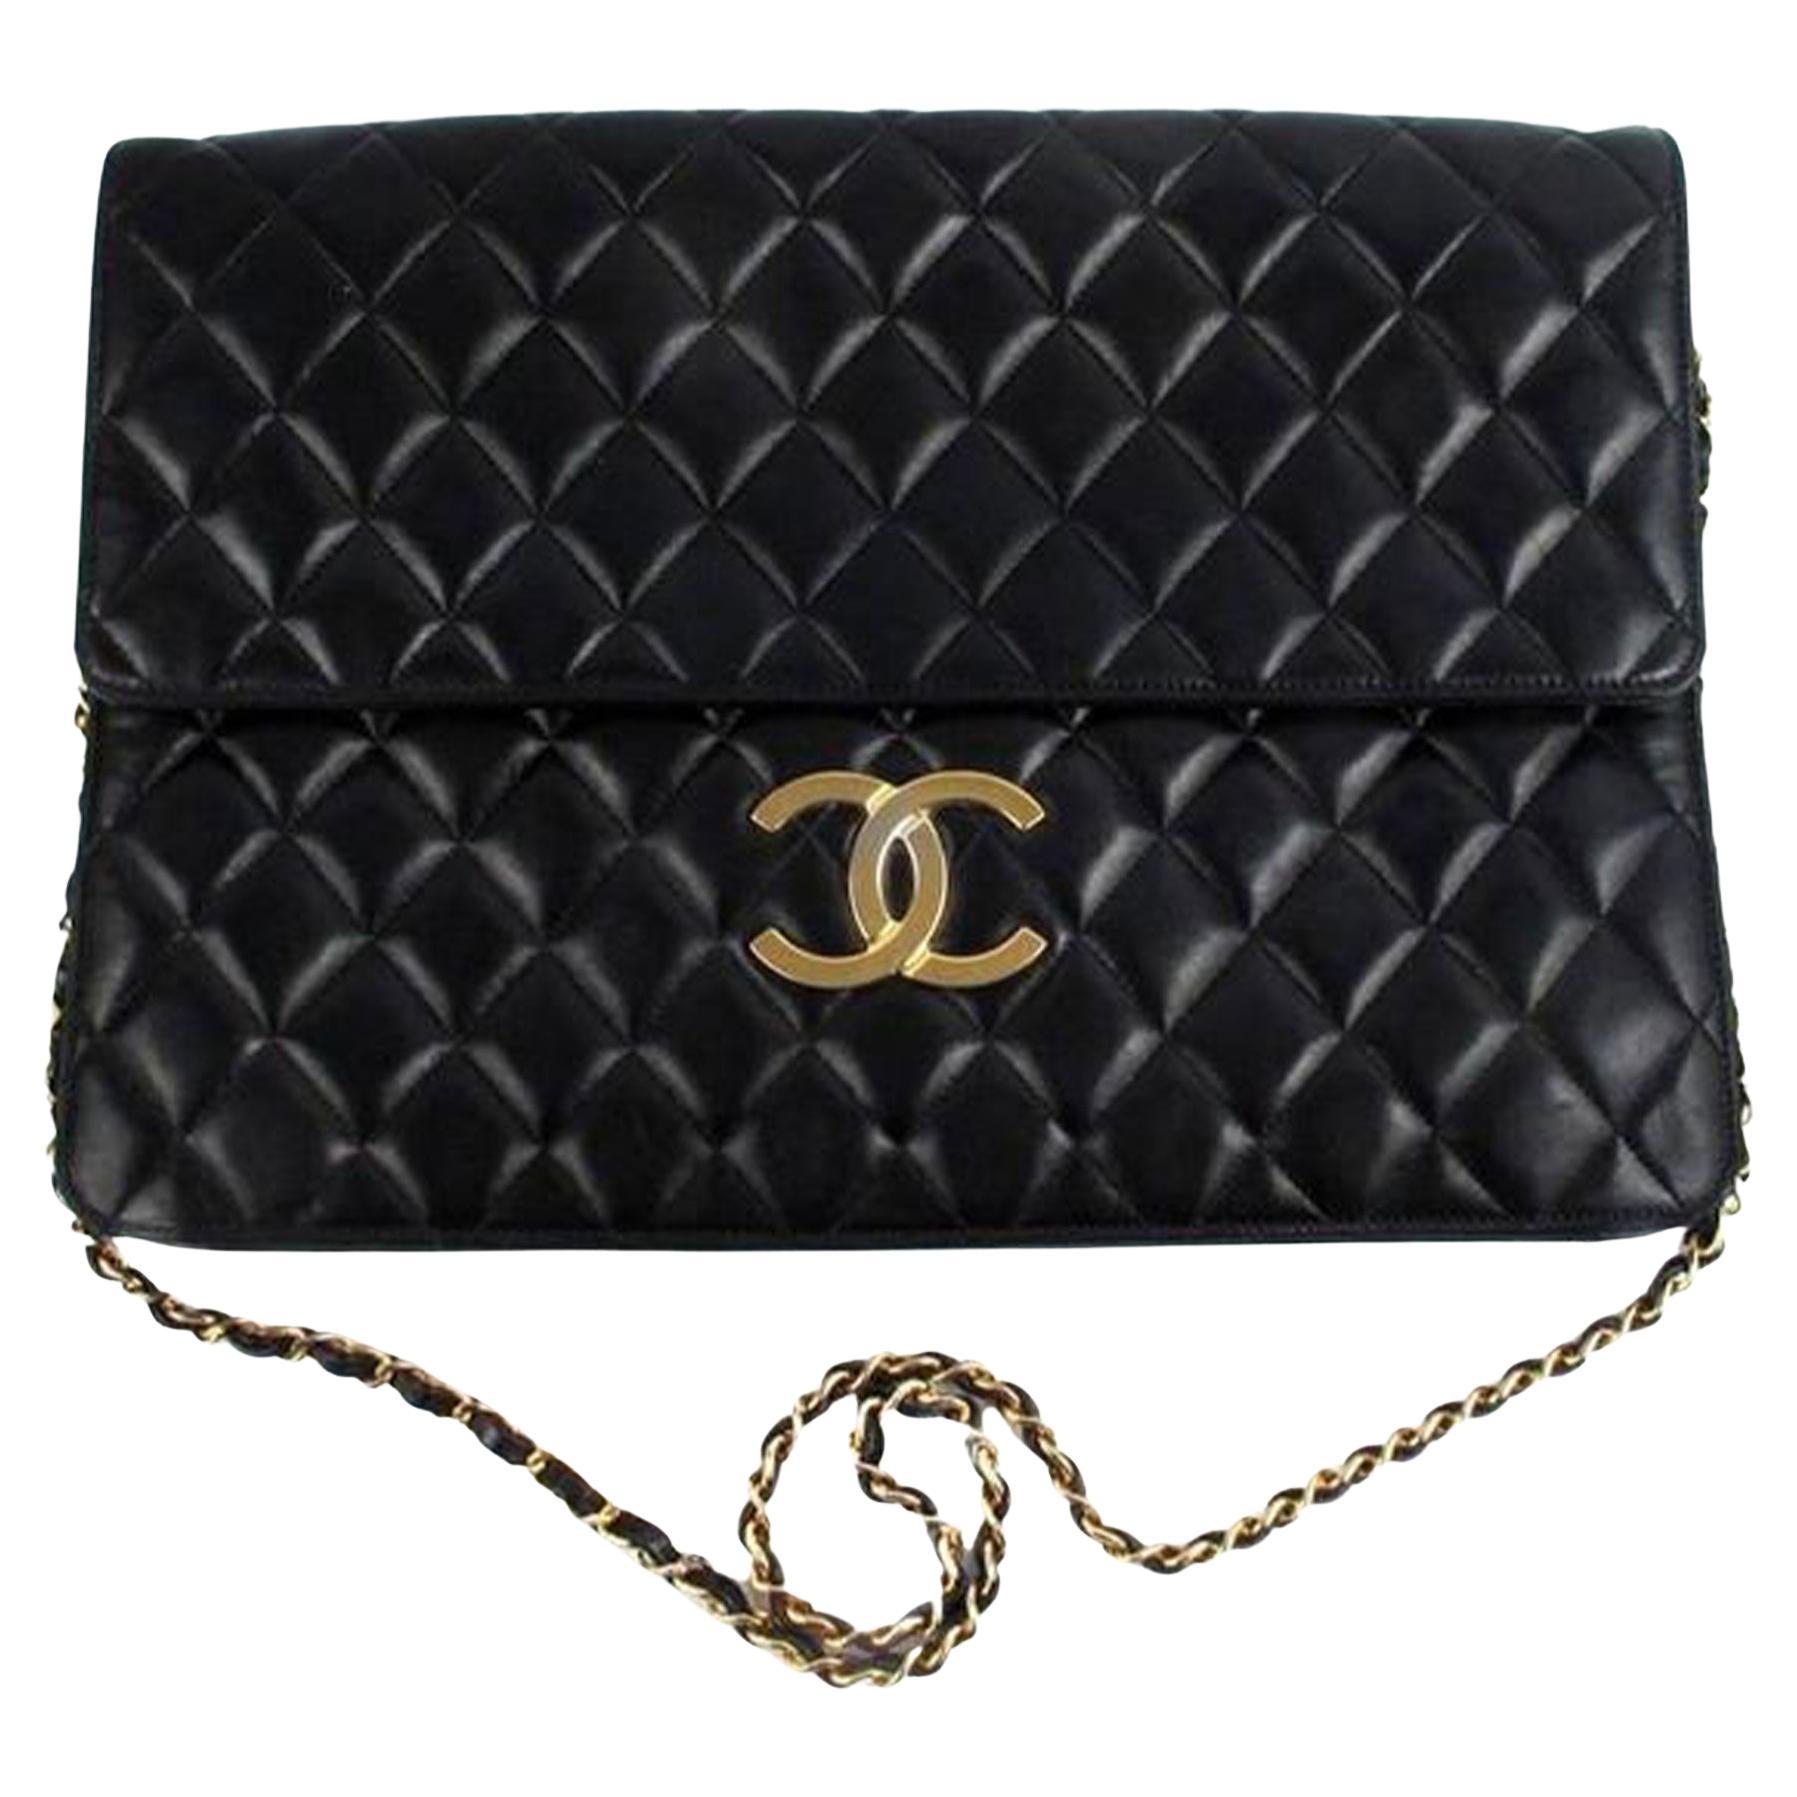 Women's or Men's Chanel 1990 Rare Jumbo Maxi XL Vintage Classic Flap Giant Clutch Briefcase For Sale